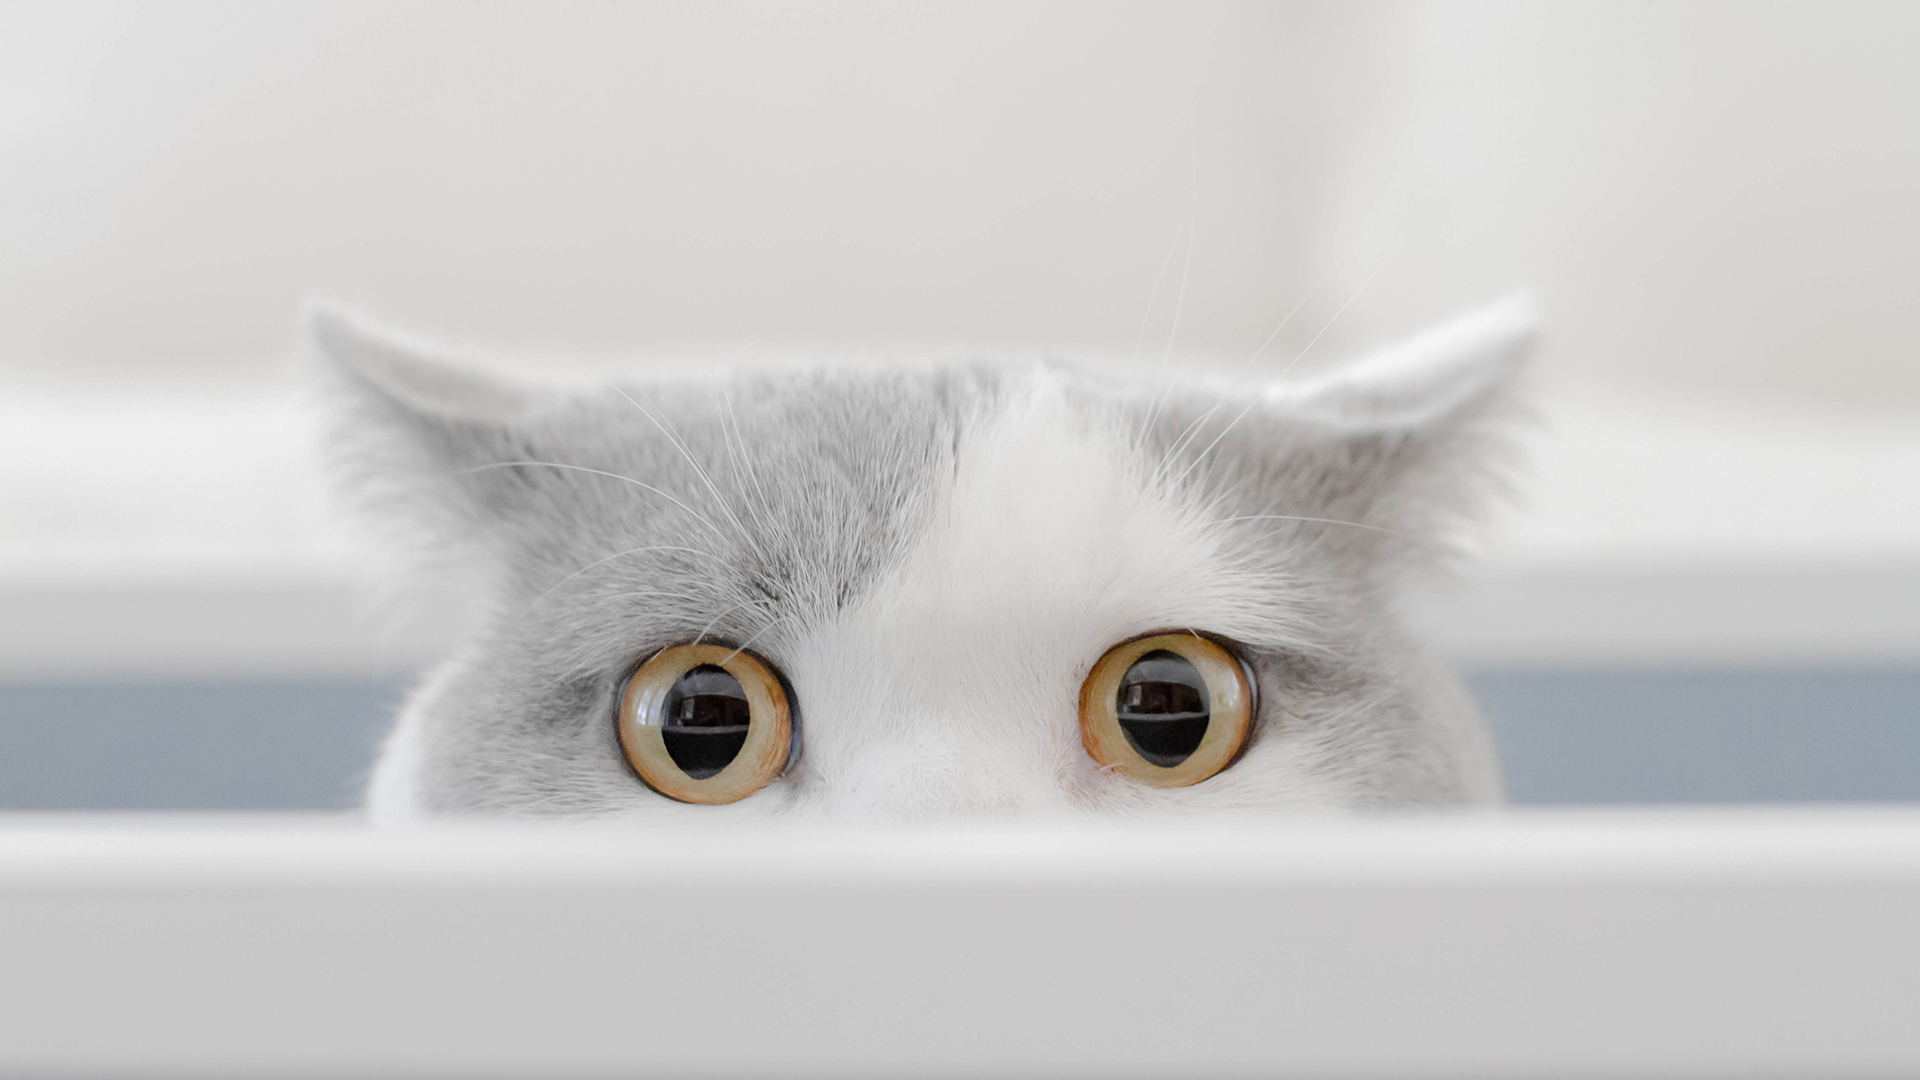 Close up of a fluffy cat's eyes, peeking over a table.